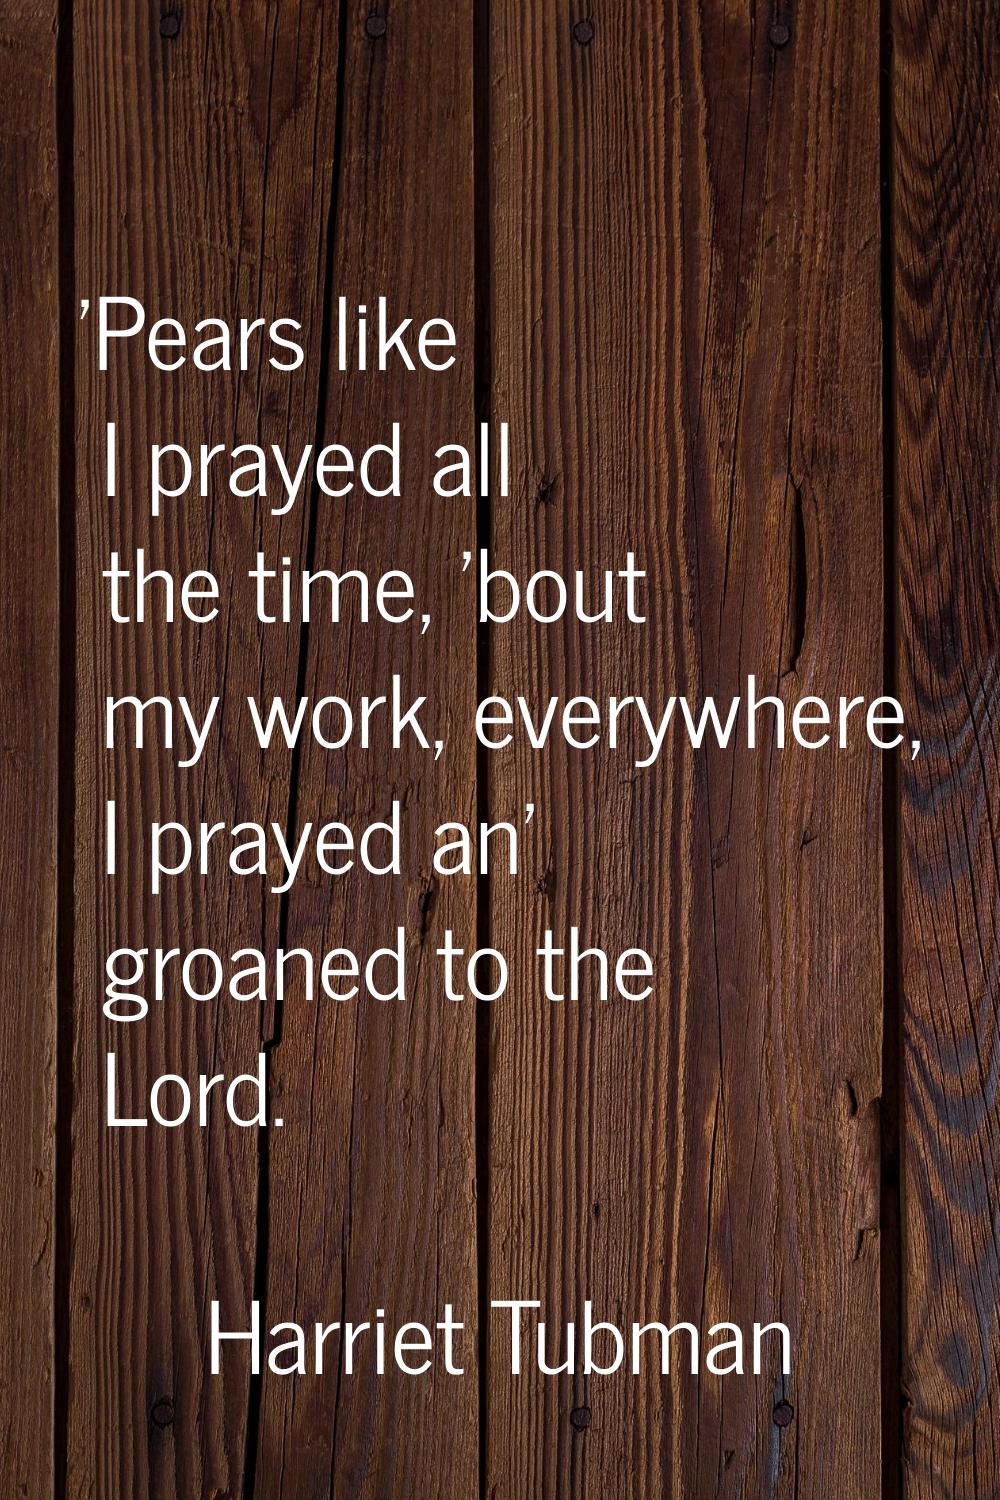 'Pears like I prayed all the time, 'bout my work, everywhere, I prayed an' groaned to the Lord.